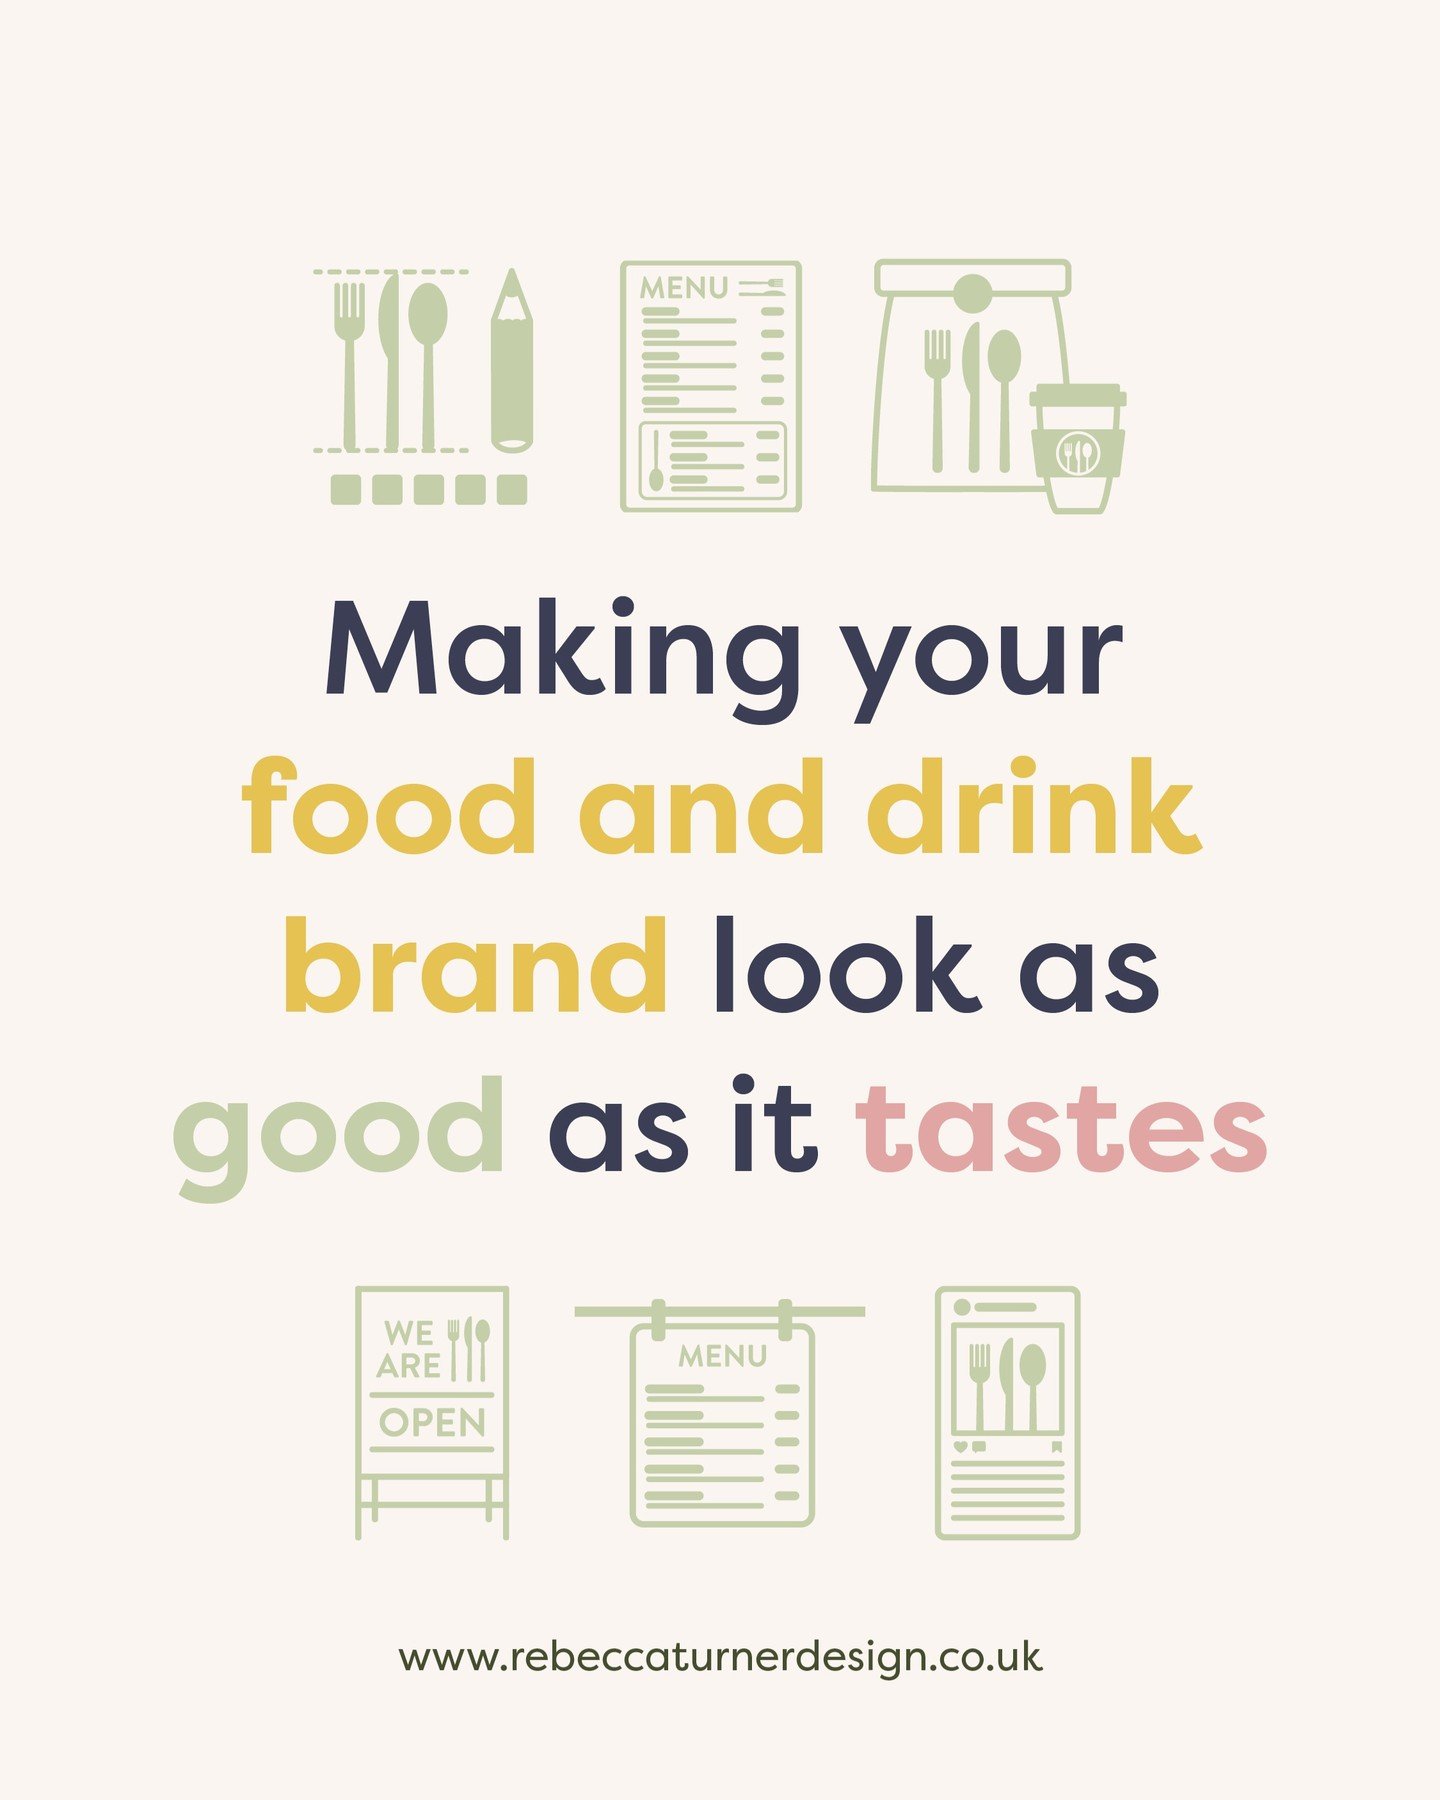 As a graphic designer my mission is to ➡ create branding, packaging and marketing which makes your food and drink brand look as good as it tastes. I do this through thoughtful design that visually reflects your food and drink, ultimately creating mem